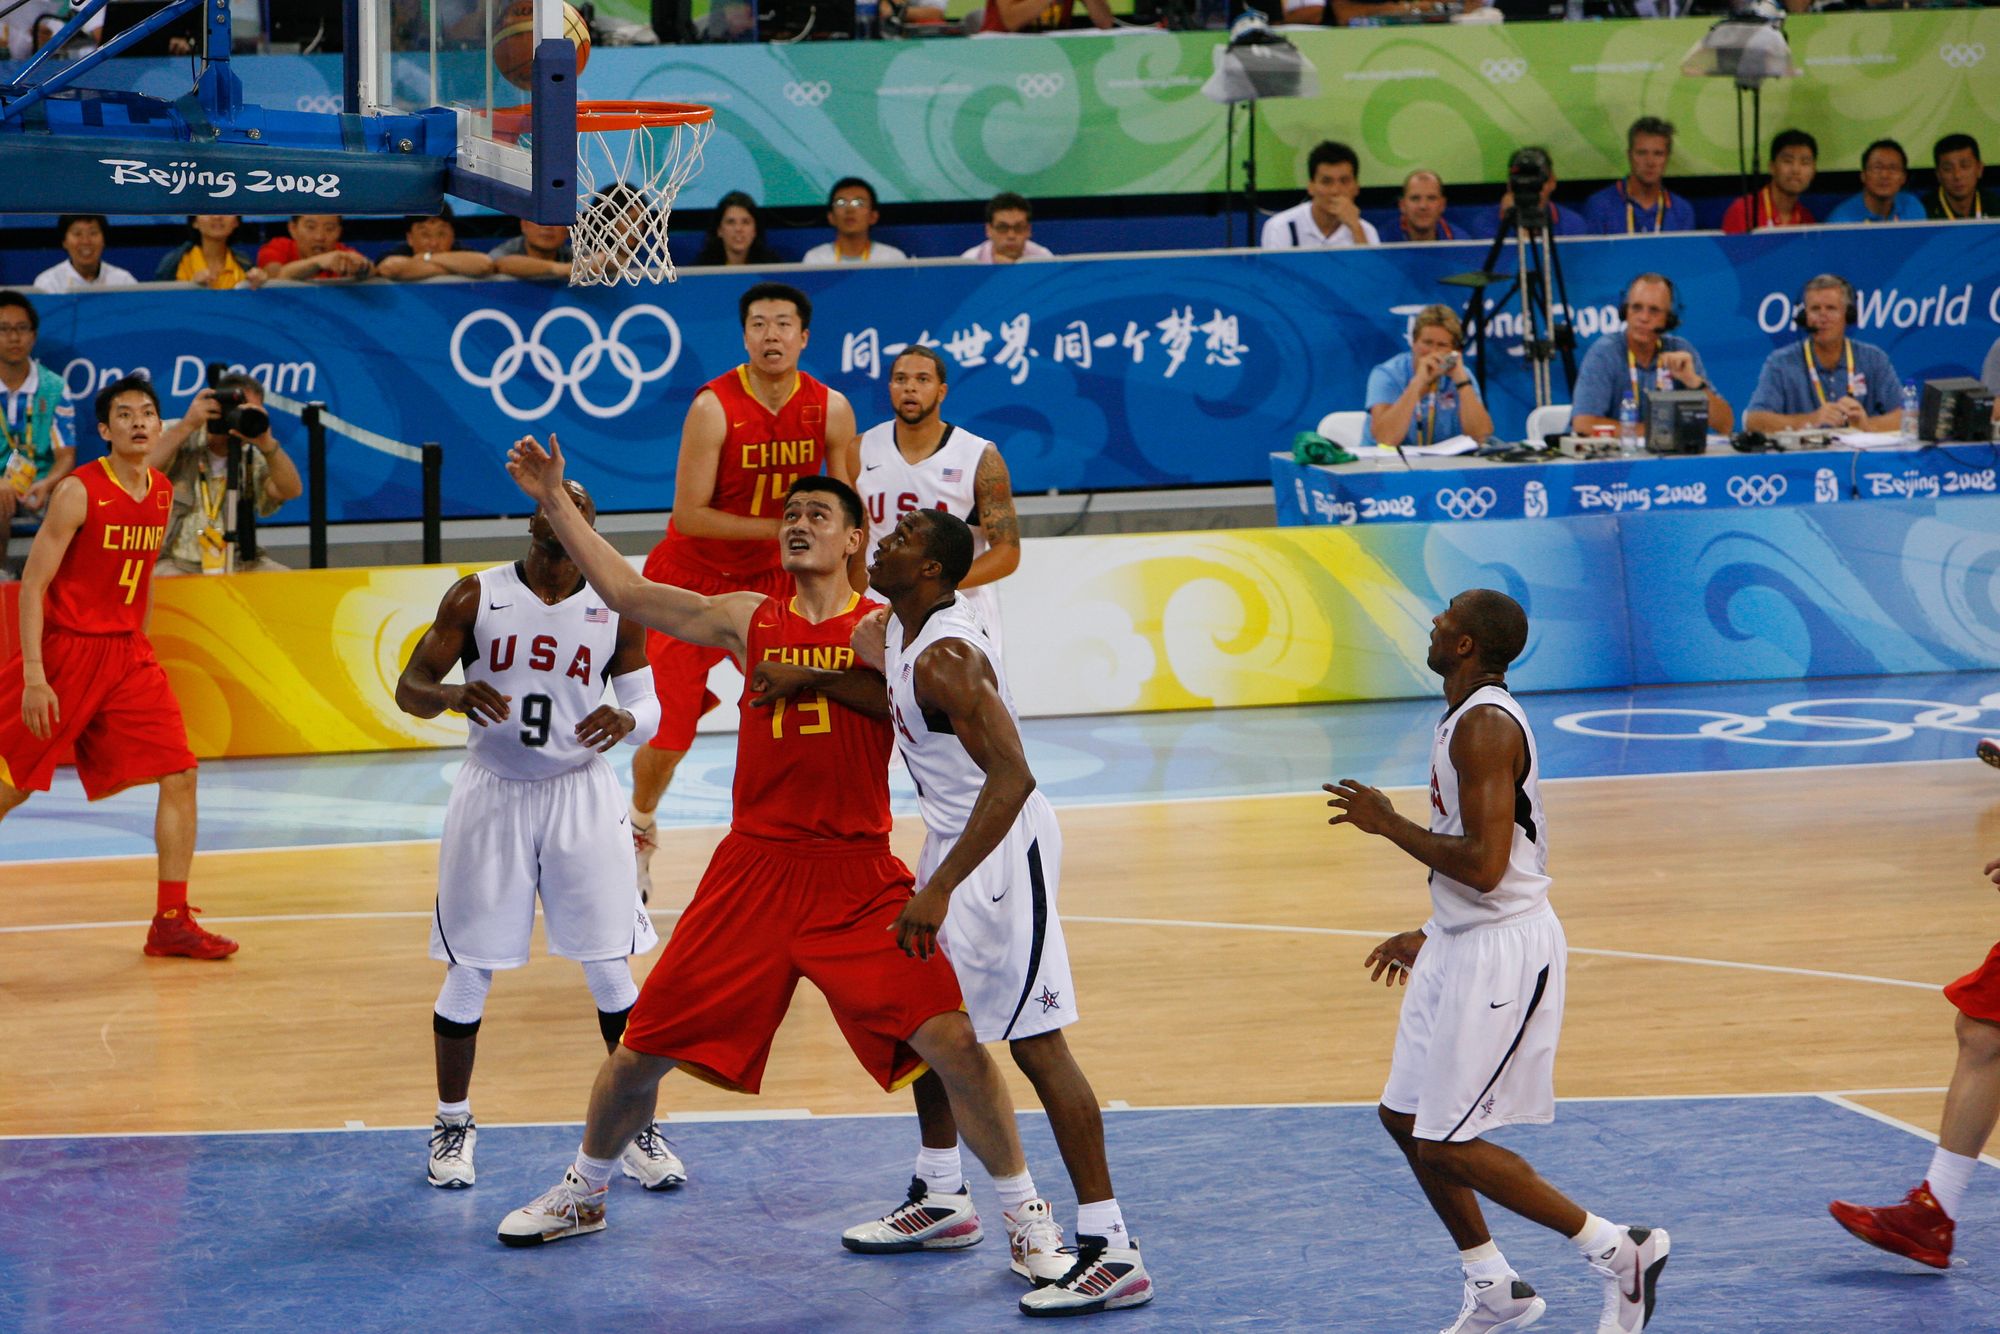 The USA and China compete in Mens Basketball - Beijing 2008 Olympic Games. Photo: Kris Krug / Flickr